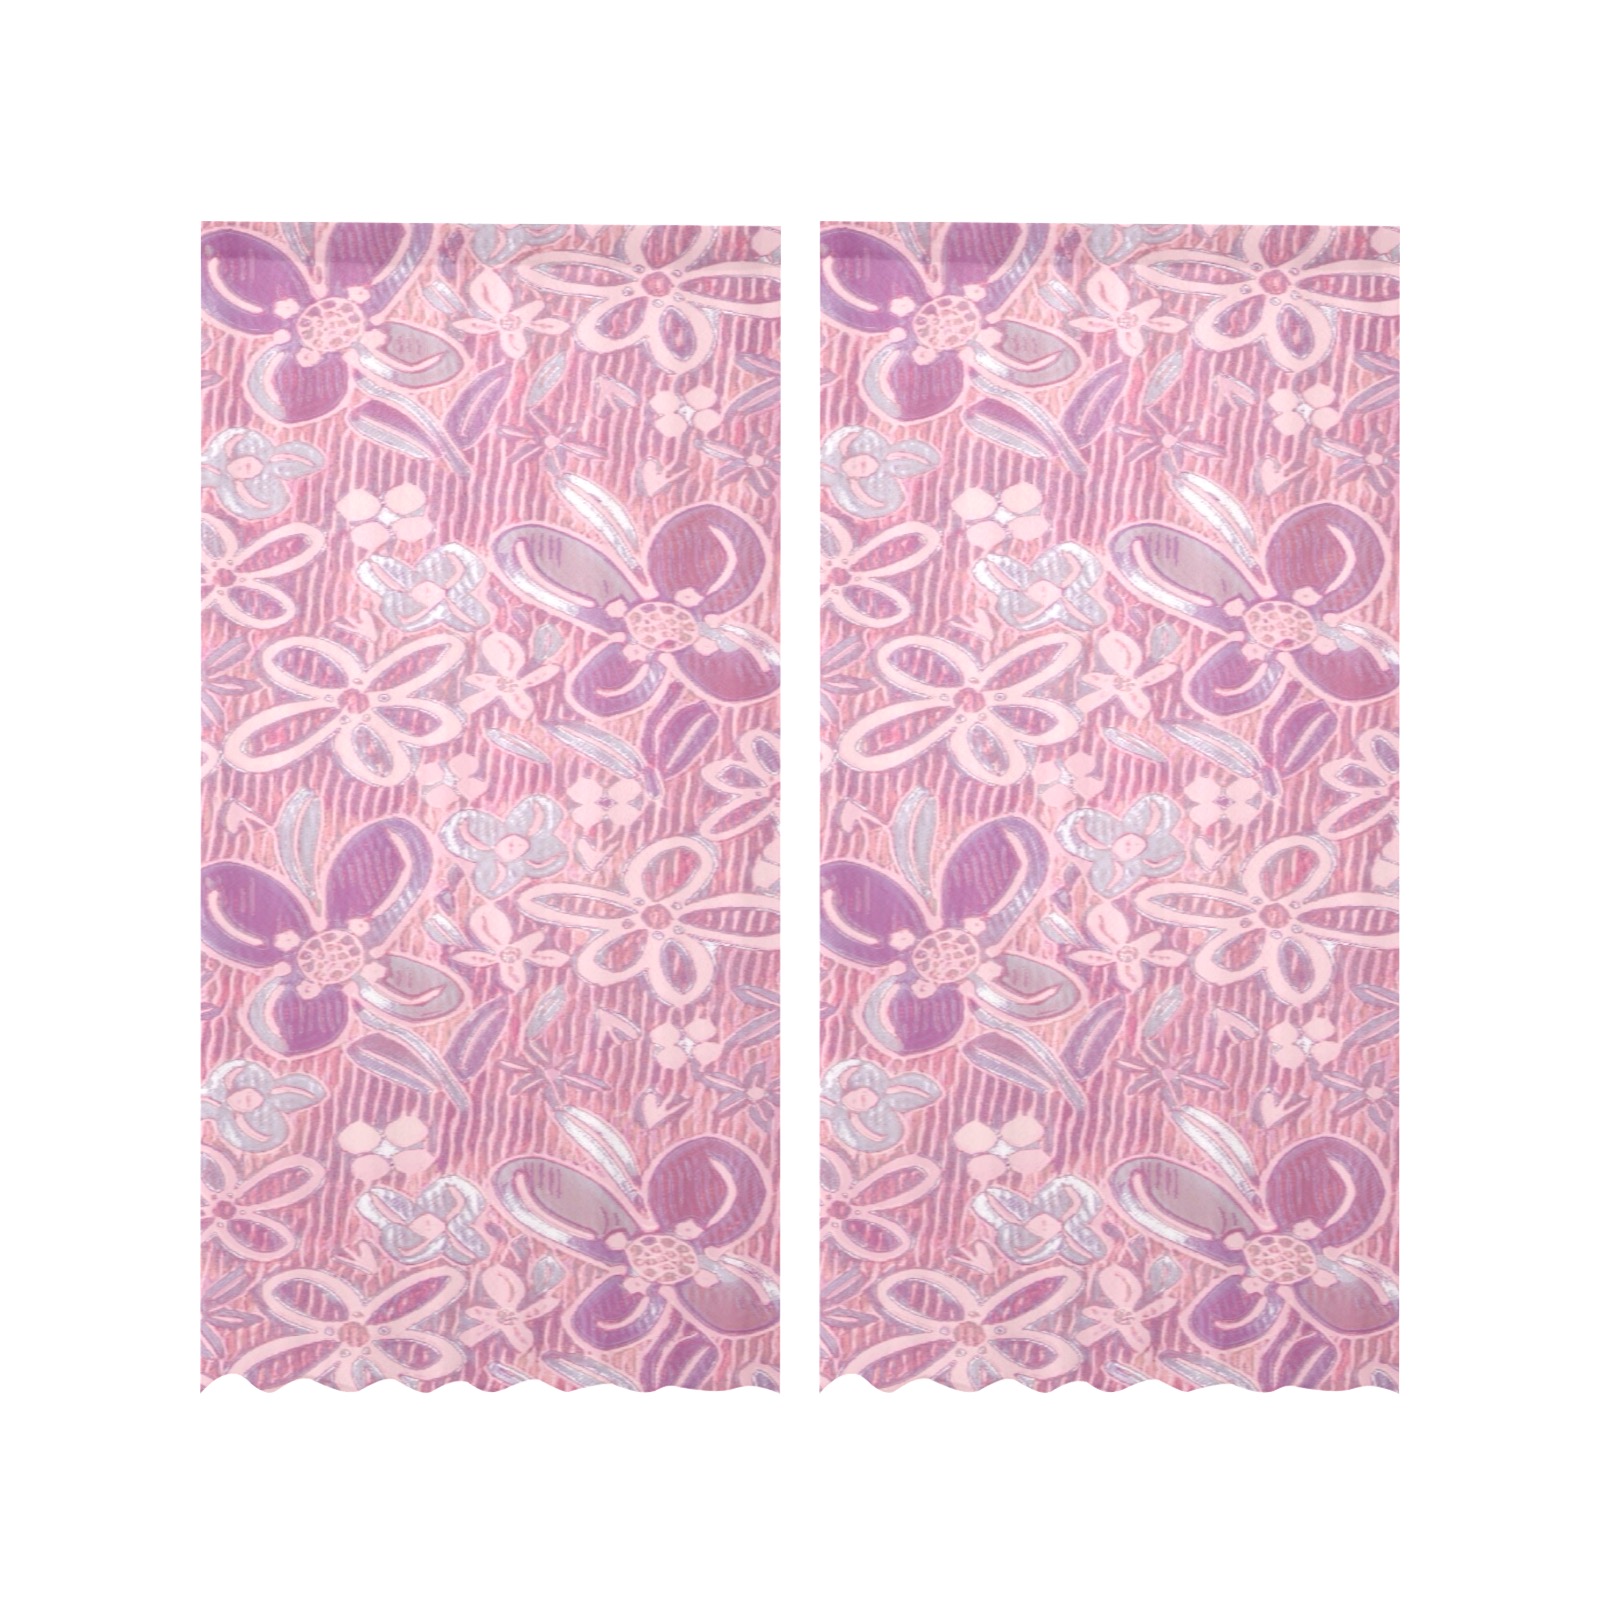 Cute floral pattern Gauze Curtain 28"x84" (Two-Piece)